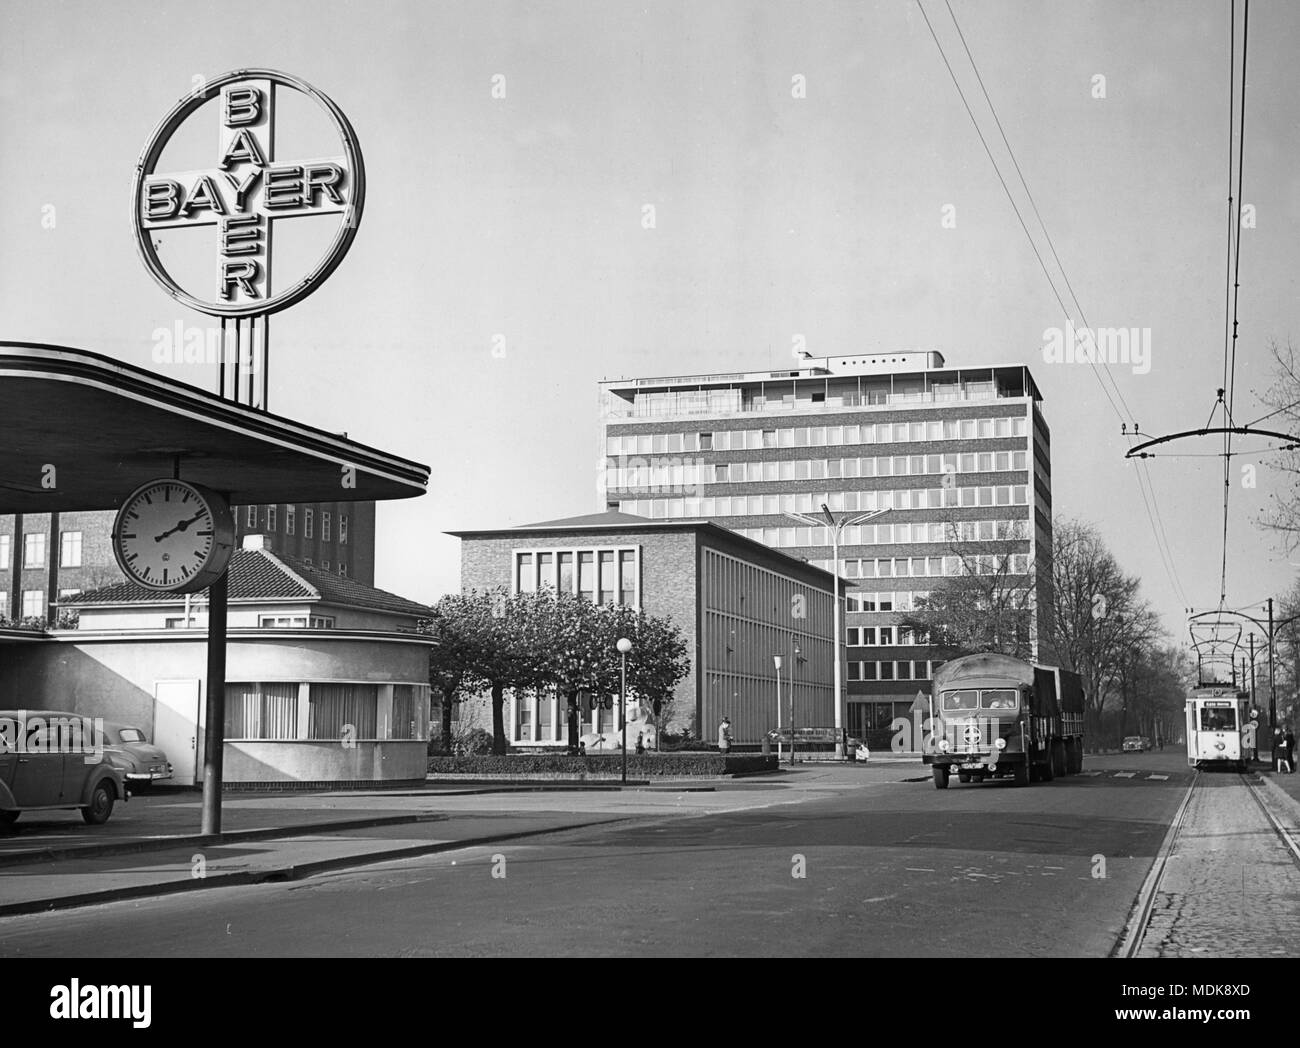 The Bayer Cross at the entrance of Bayer AG in Leverkusen, photographed in 1955. Photo: Otto Noecker     (c) dpa - Report     | usage worldwide Stock Photo